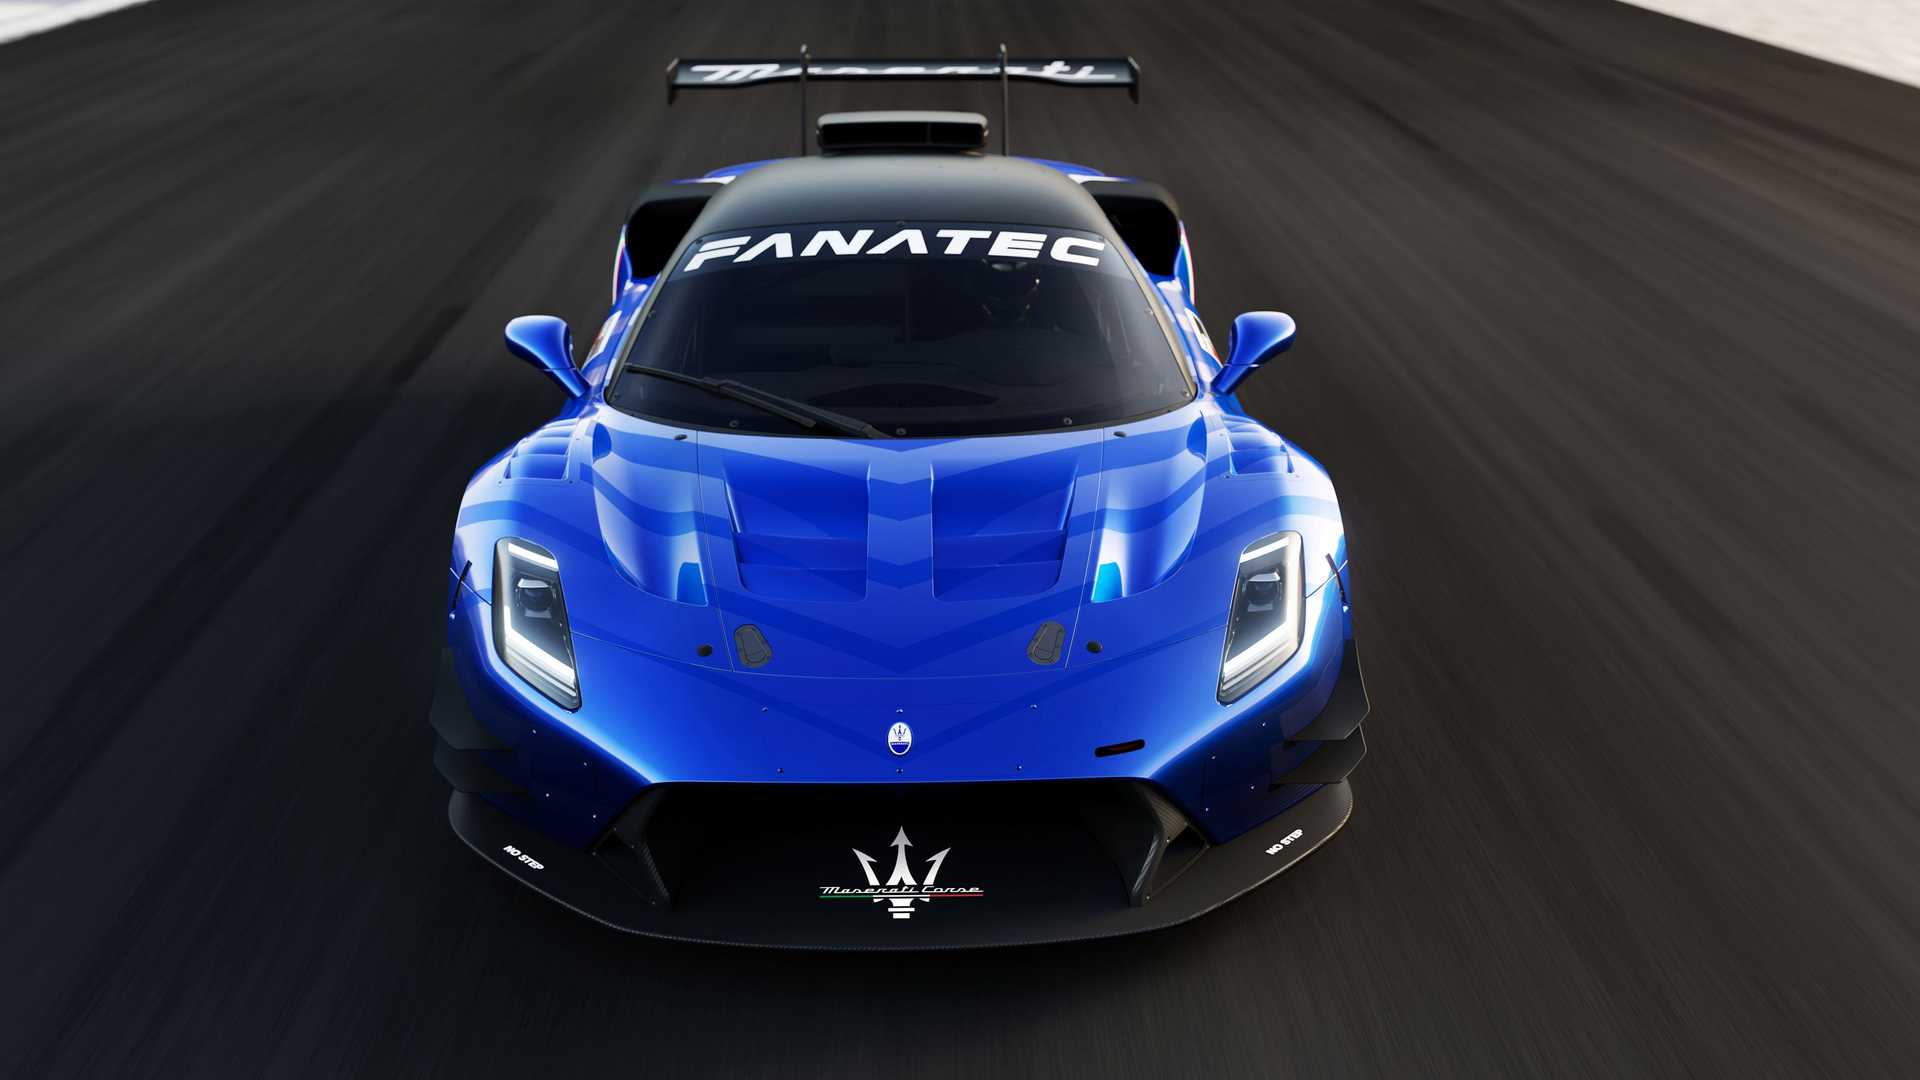 Frontal view of a blue Maserati GT2 race car.